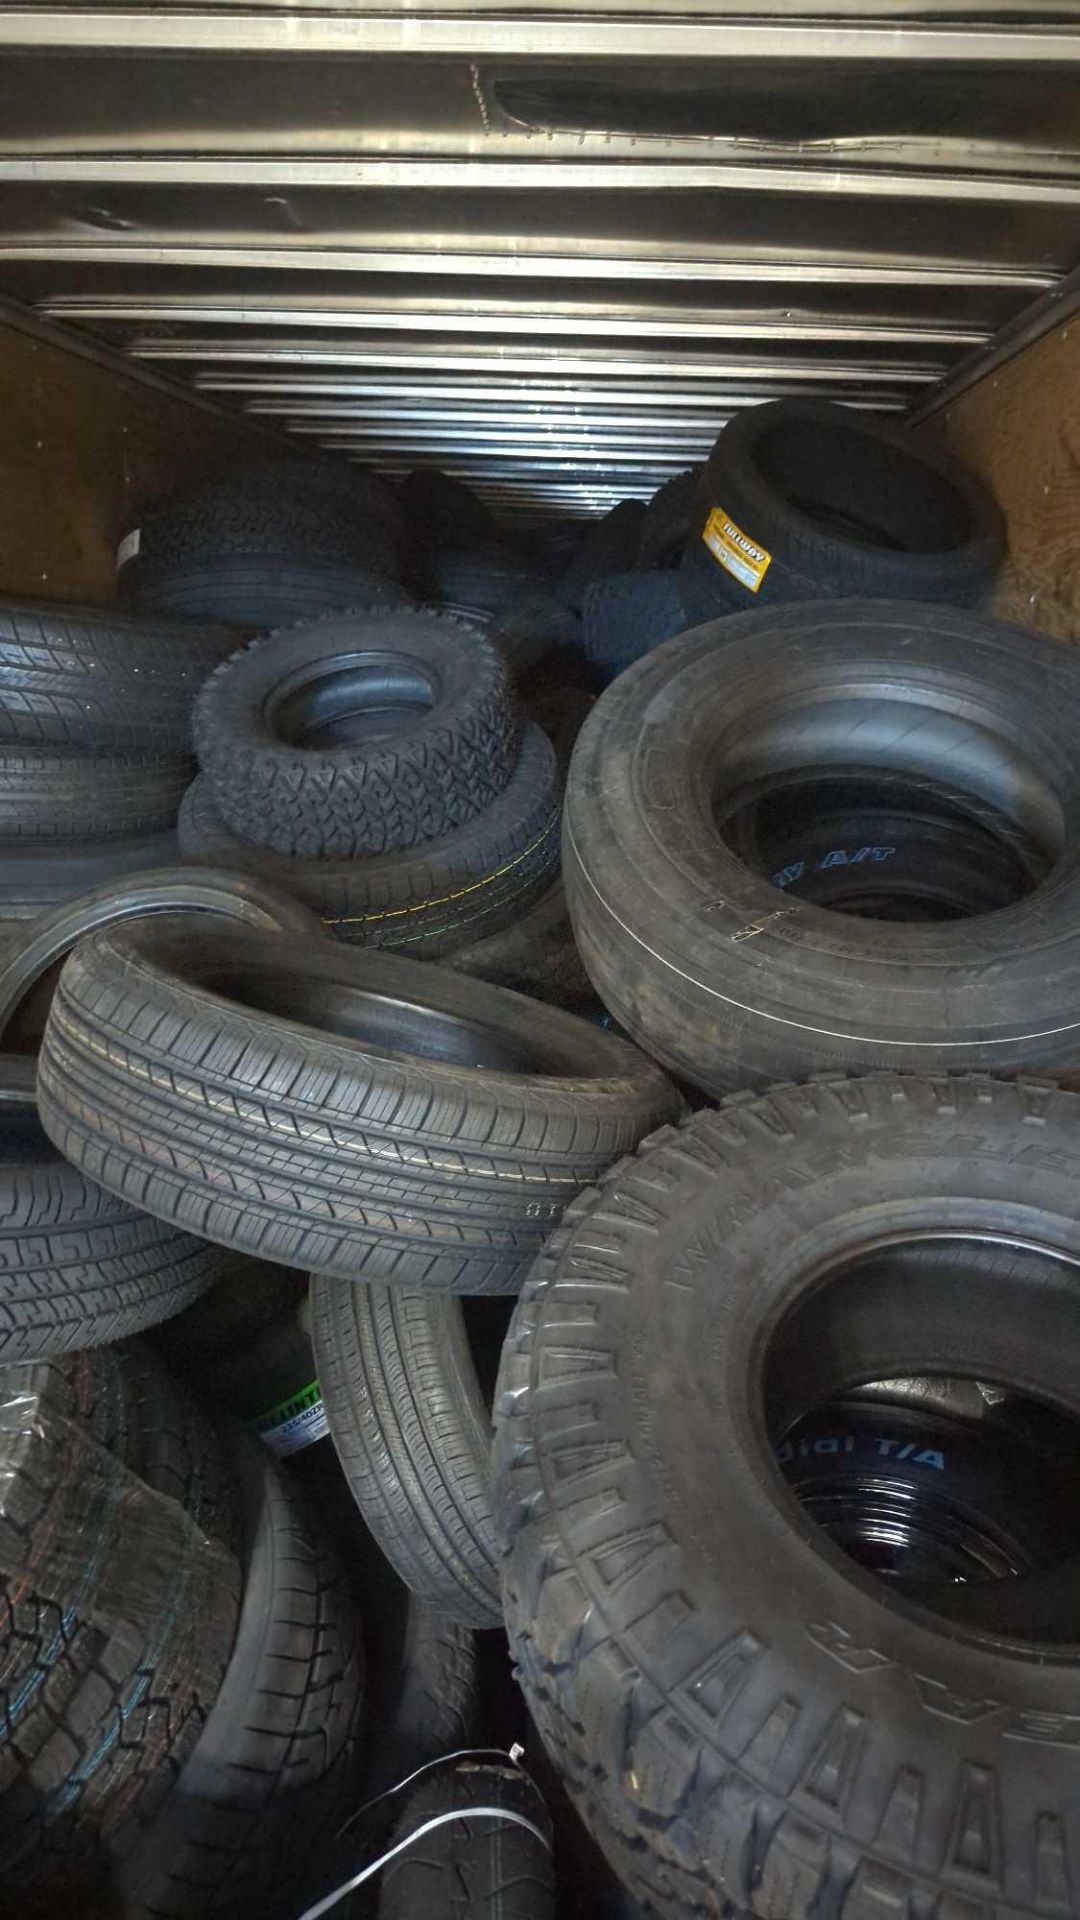 Semi of Tires - Image 8 of 9